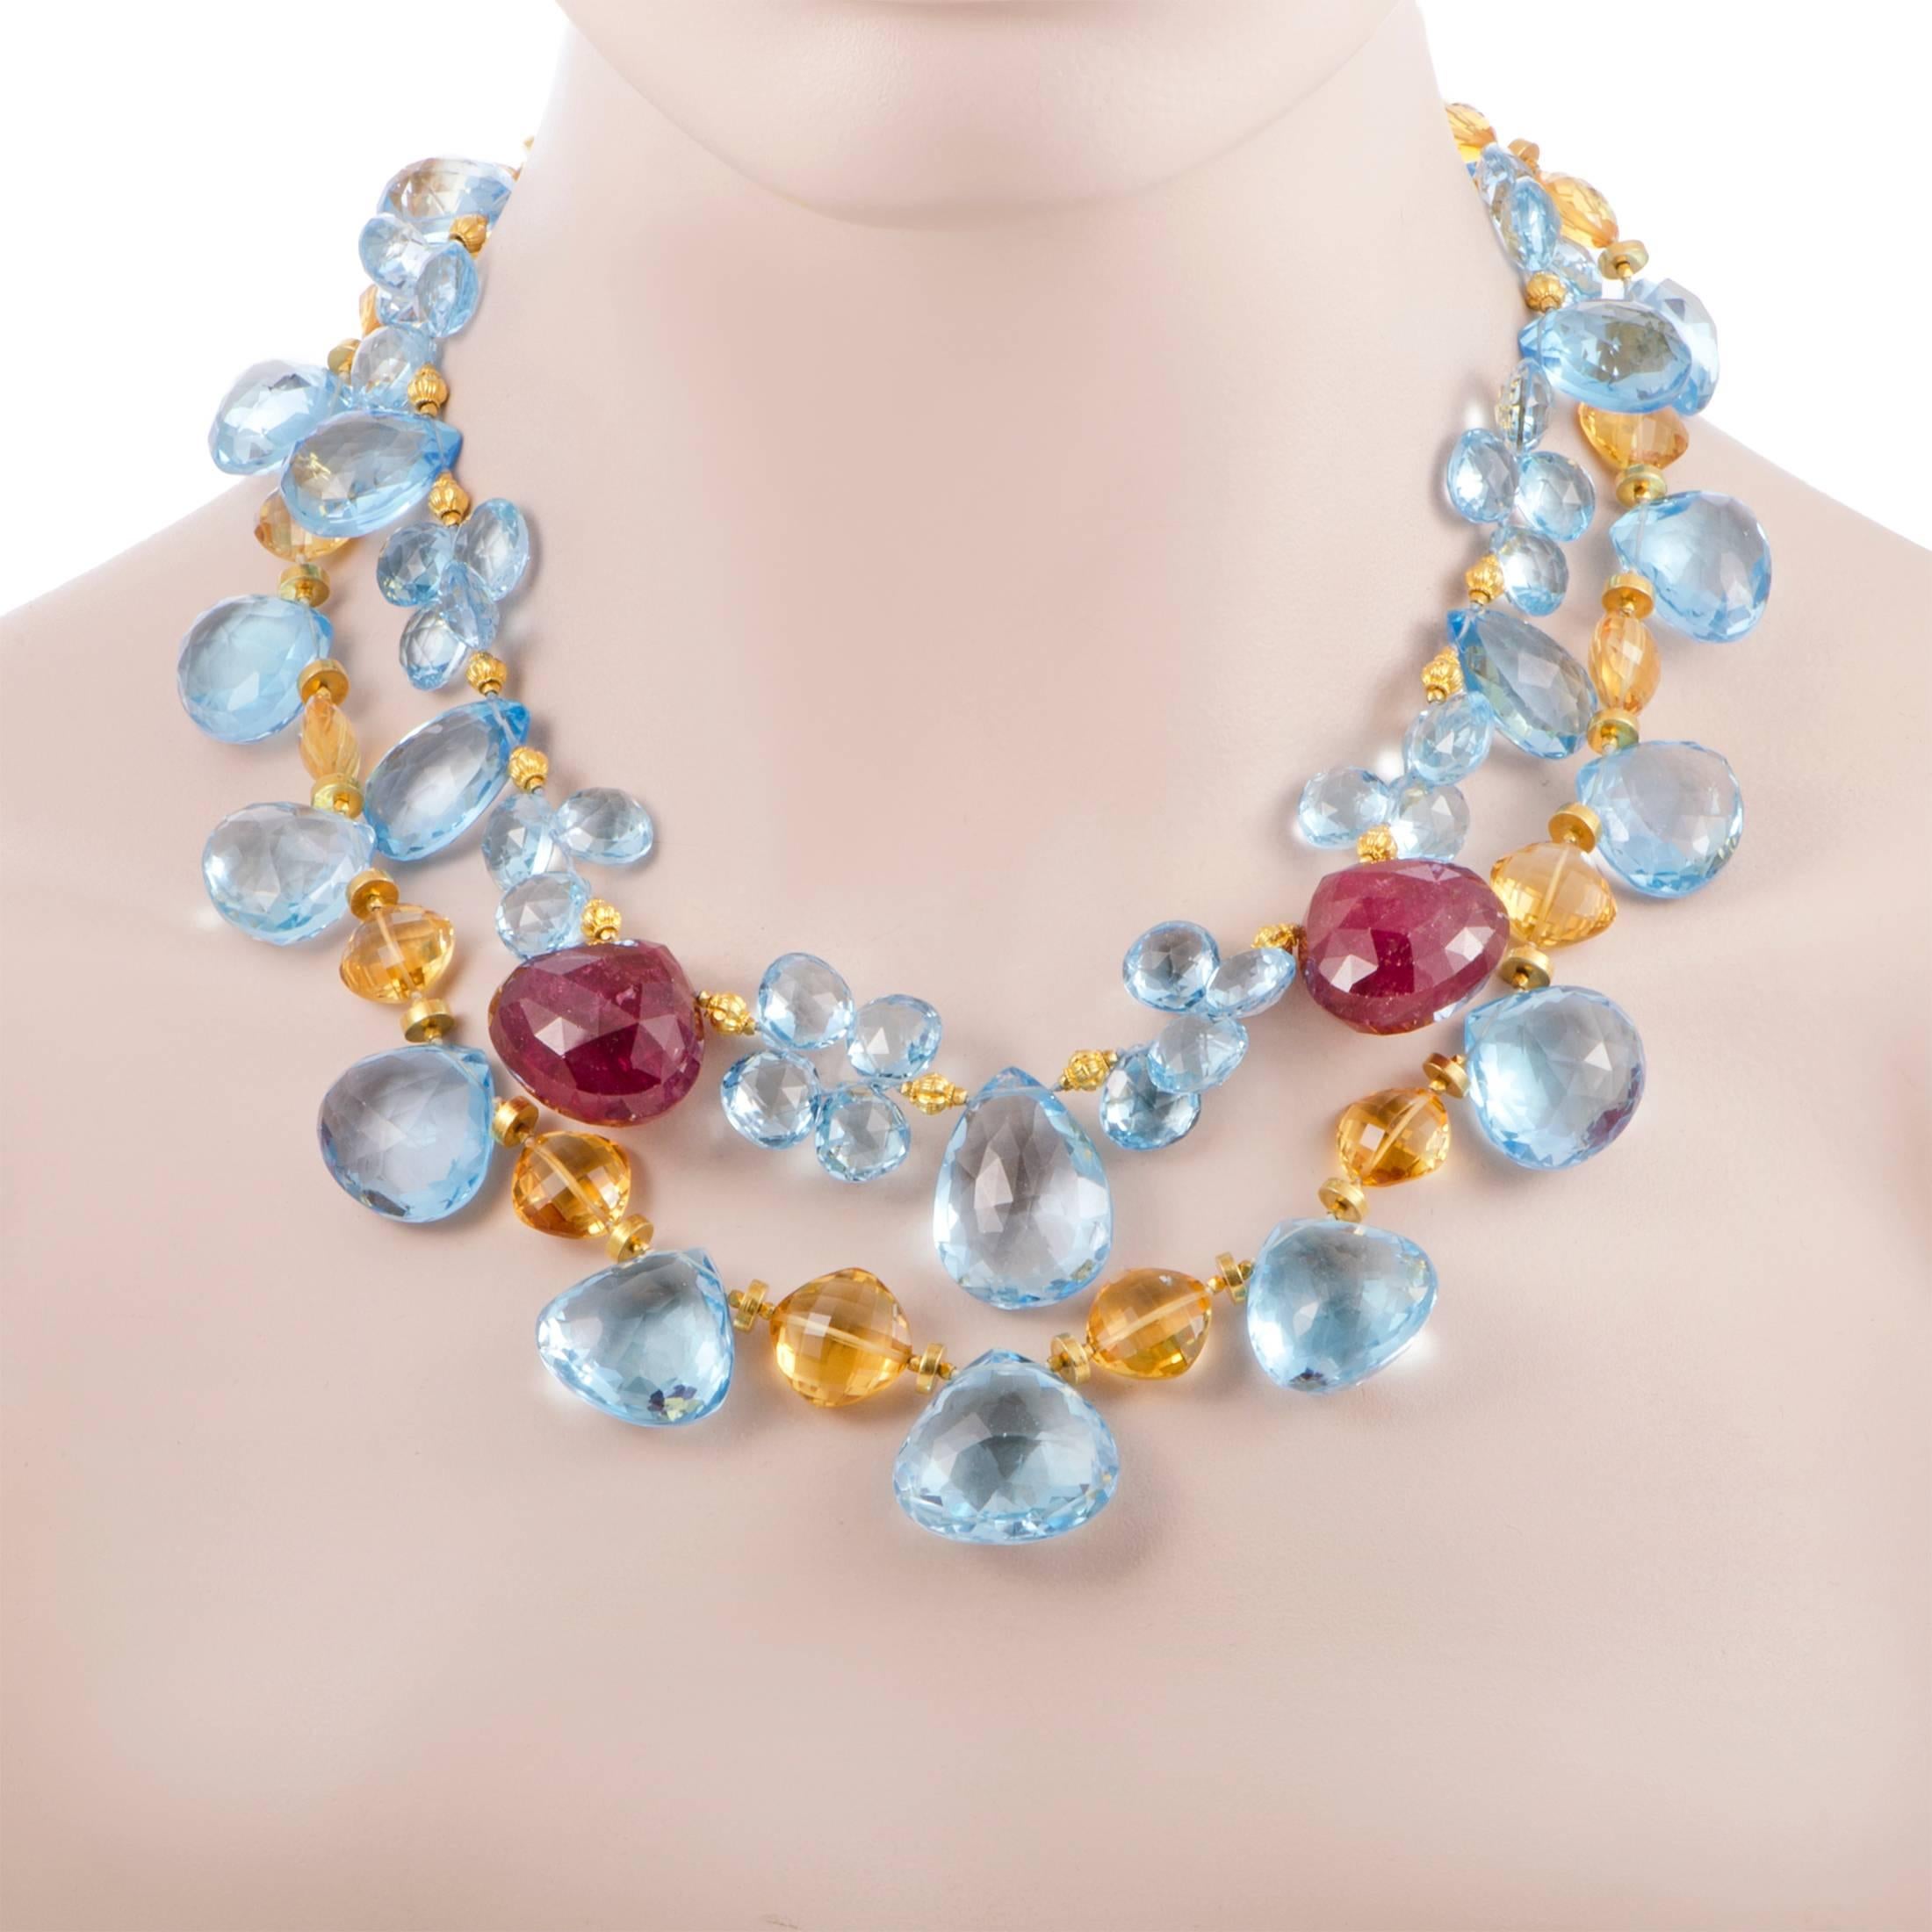 A statement piece that is given a whimsical appeal by the colorful ruby, topaz and citrine stones, while at the same time retaining classy, prestigious allure thanks to the elegant sheen of the gold, this necklace offers an appearance of pure beauty